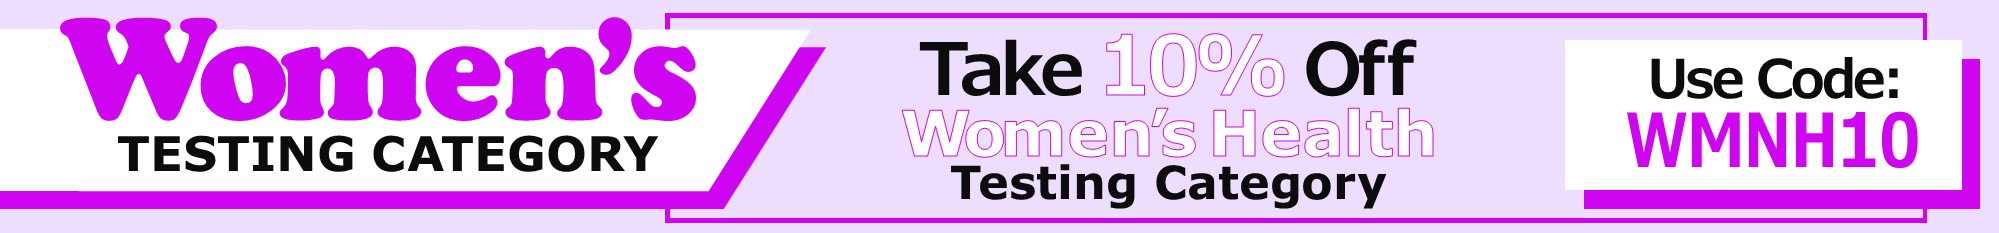 Women's Health Lab tests 10% Off Promo Code WMNH10